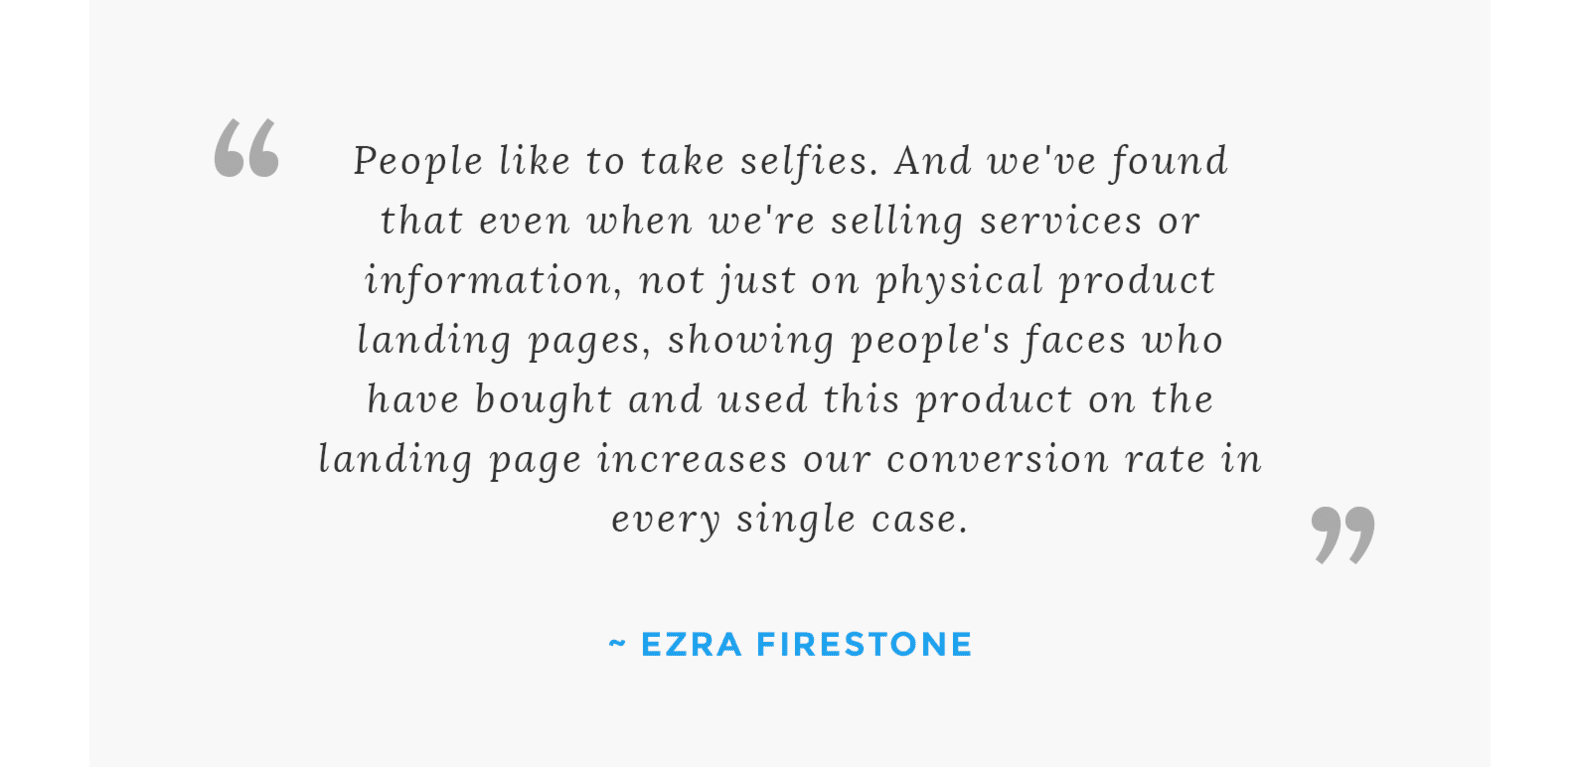 “People like to take selfies. And we've found that even when we're selling services or information, not just on physical product landing pages, showing people's faces who have bought and used this product on the landing page increases our conversion rate in every single case.” - Ezra Firestone